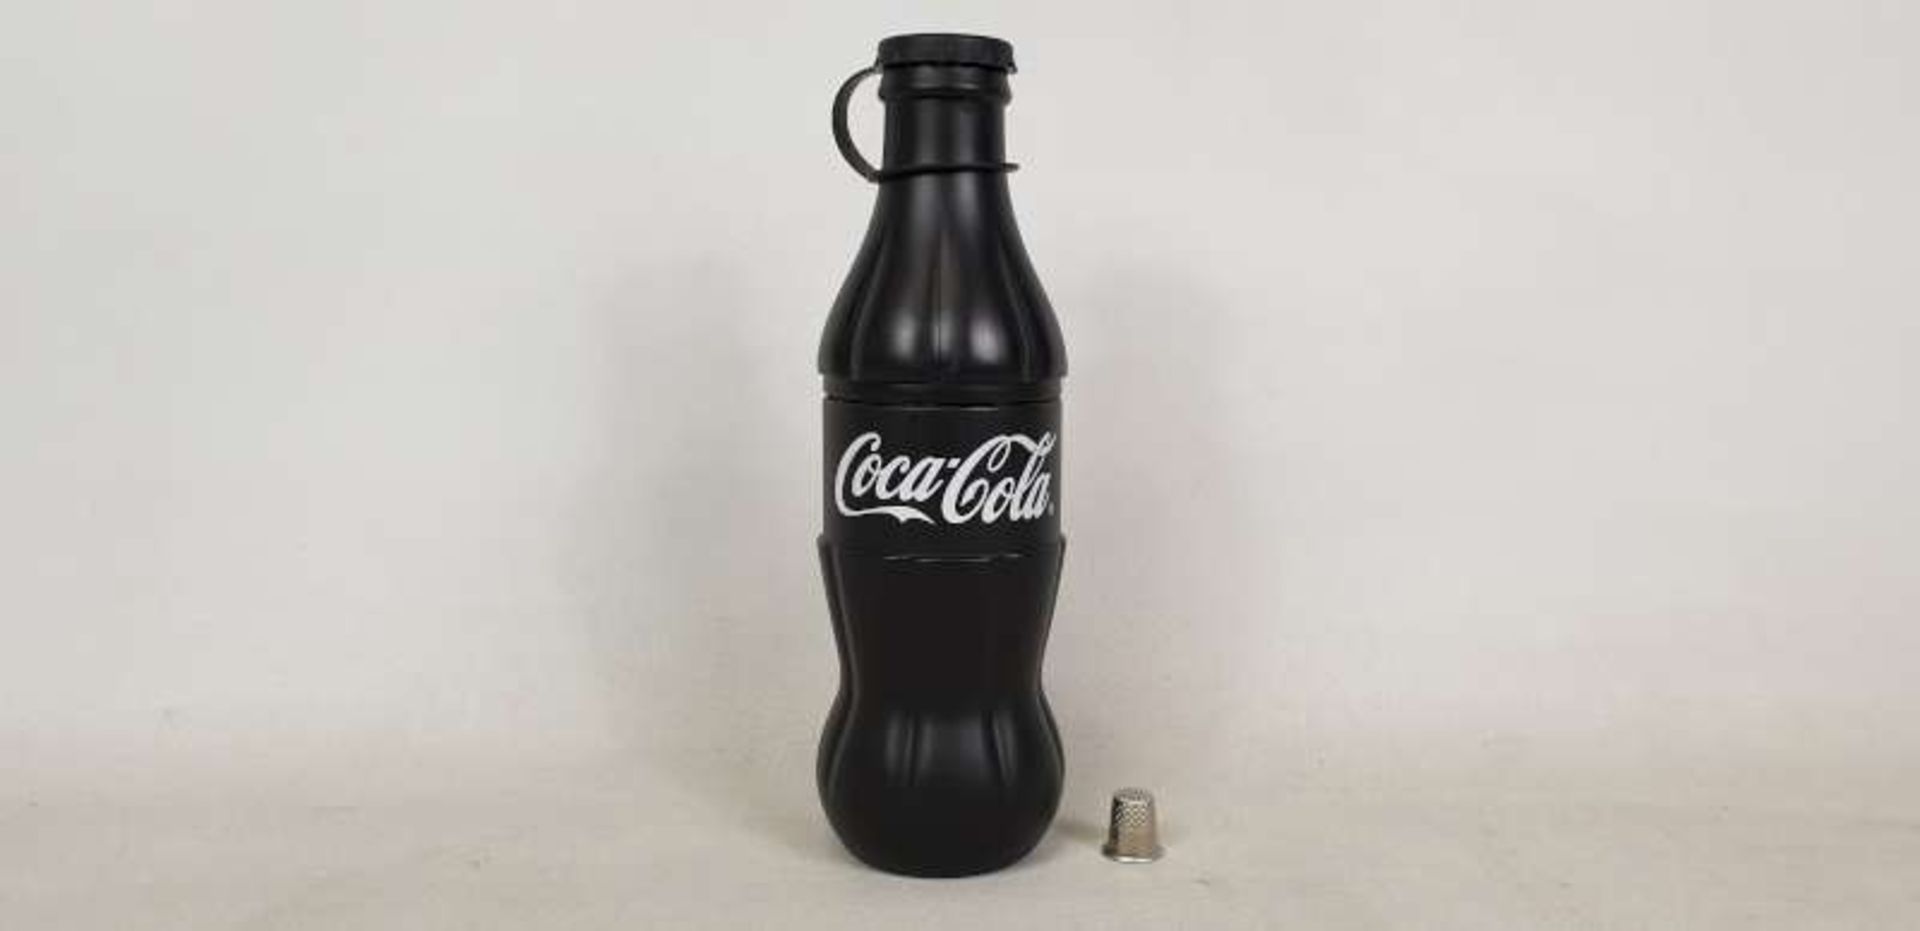 96 X 500ML COCA COLA DRINKING BOTTLES IN 2 BOXES